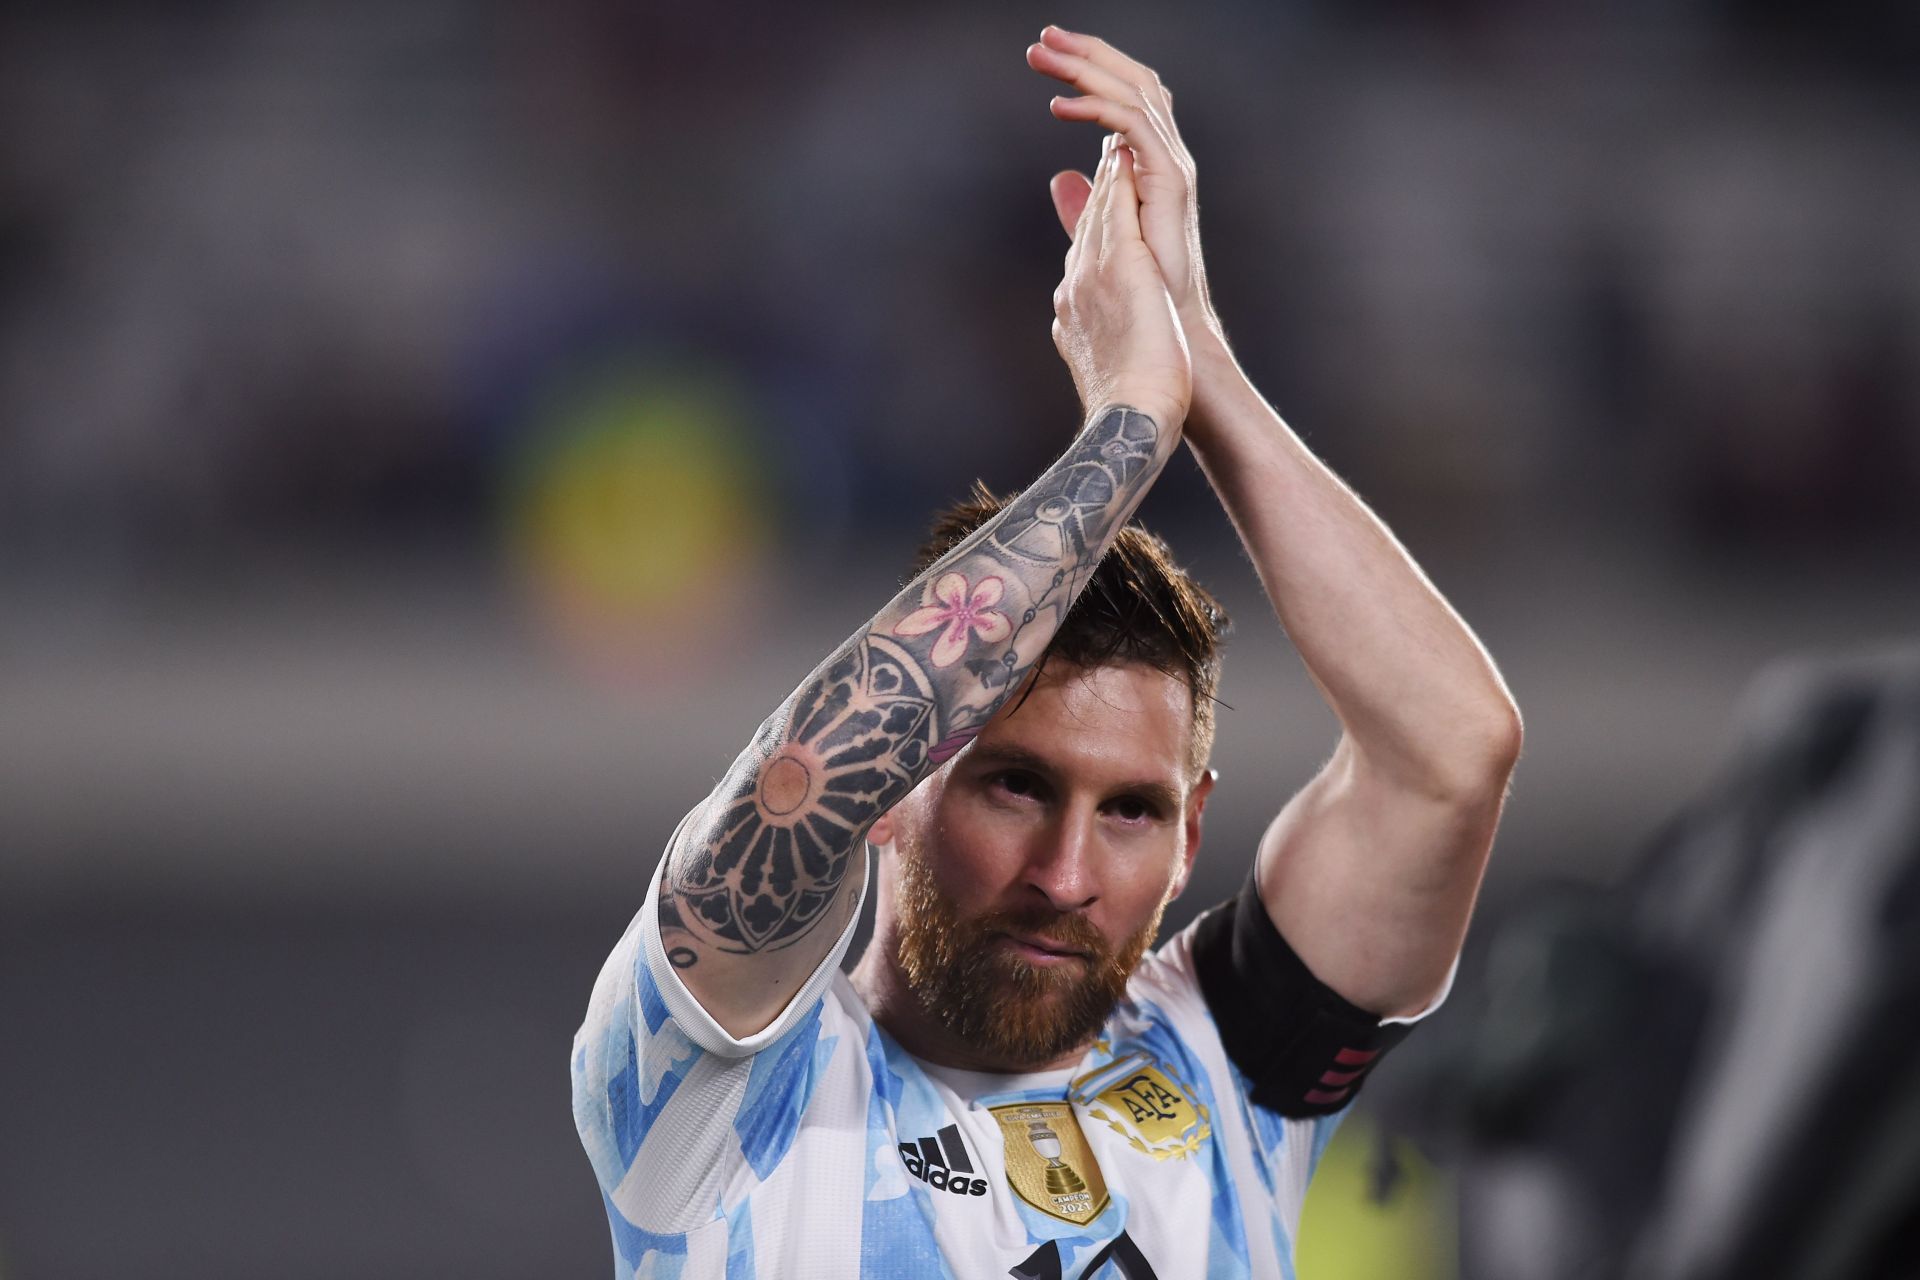 Argentina skipper Lionel Messi. (Photo by Marcelo Endelli/Getty Images)